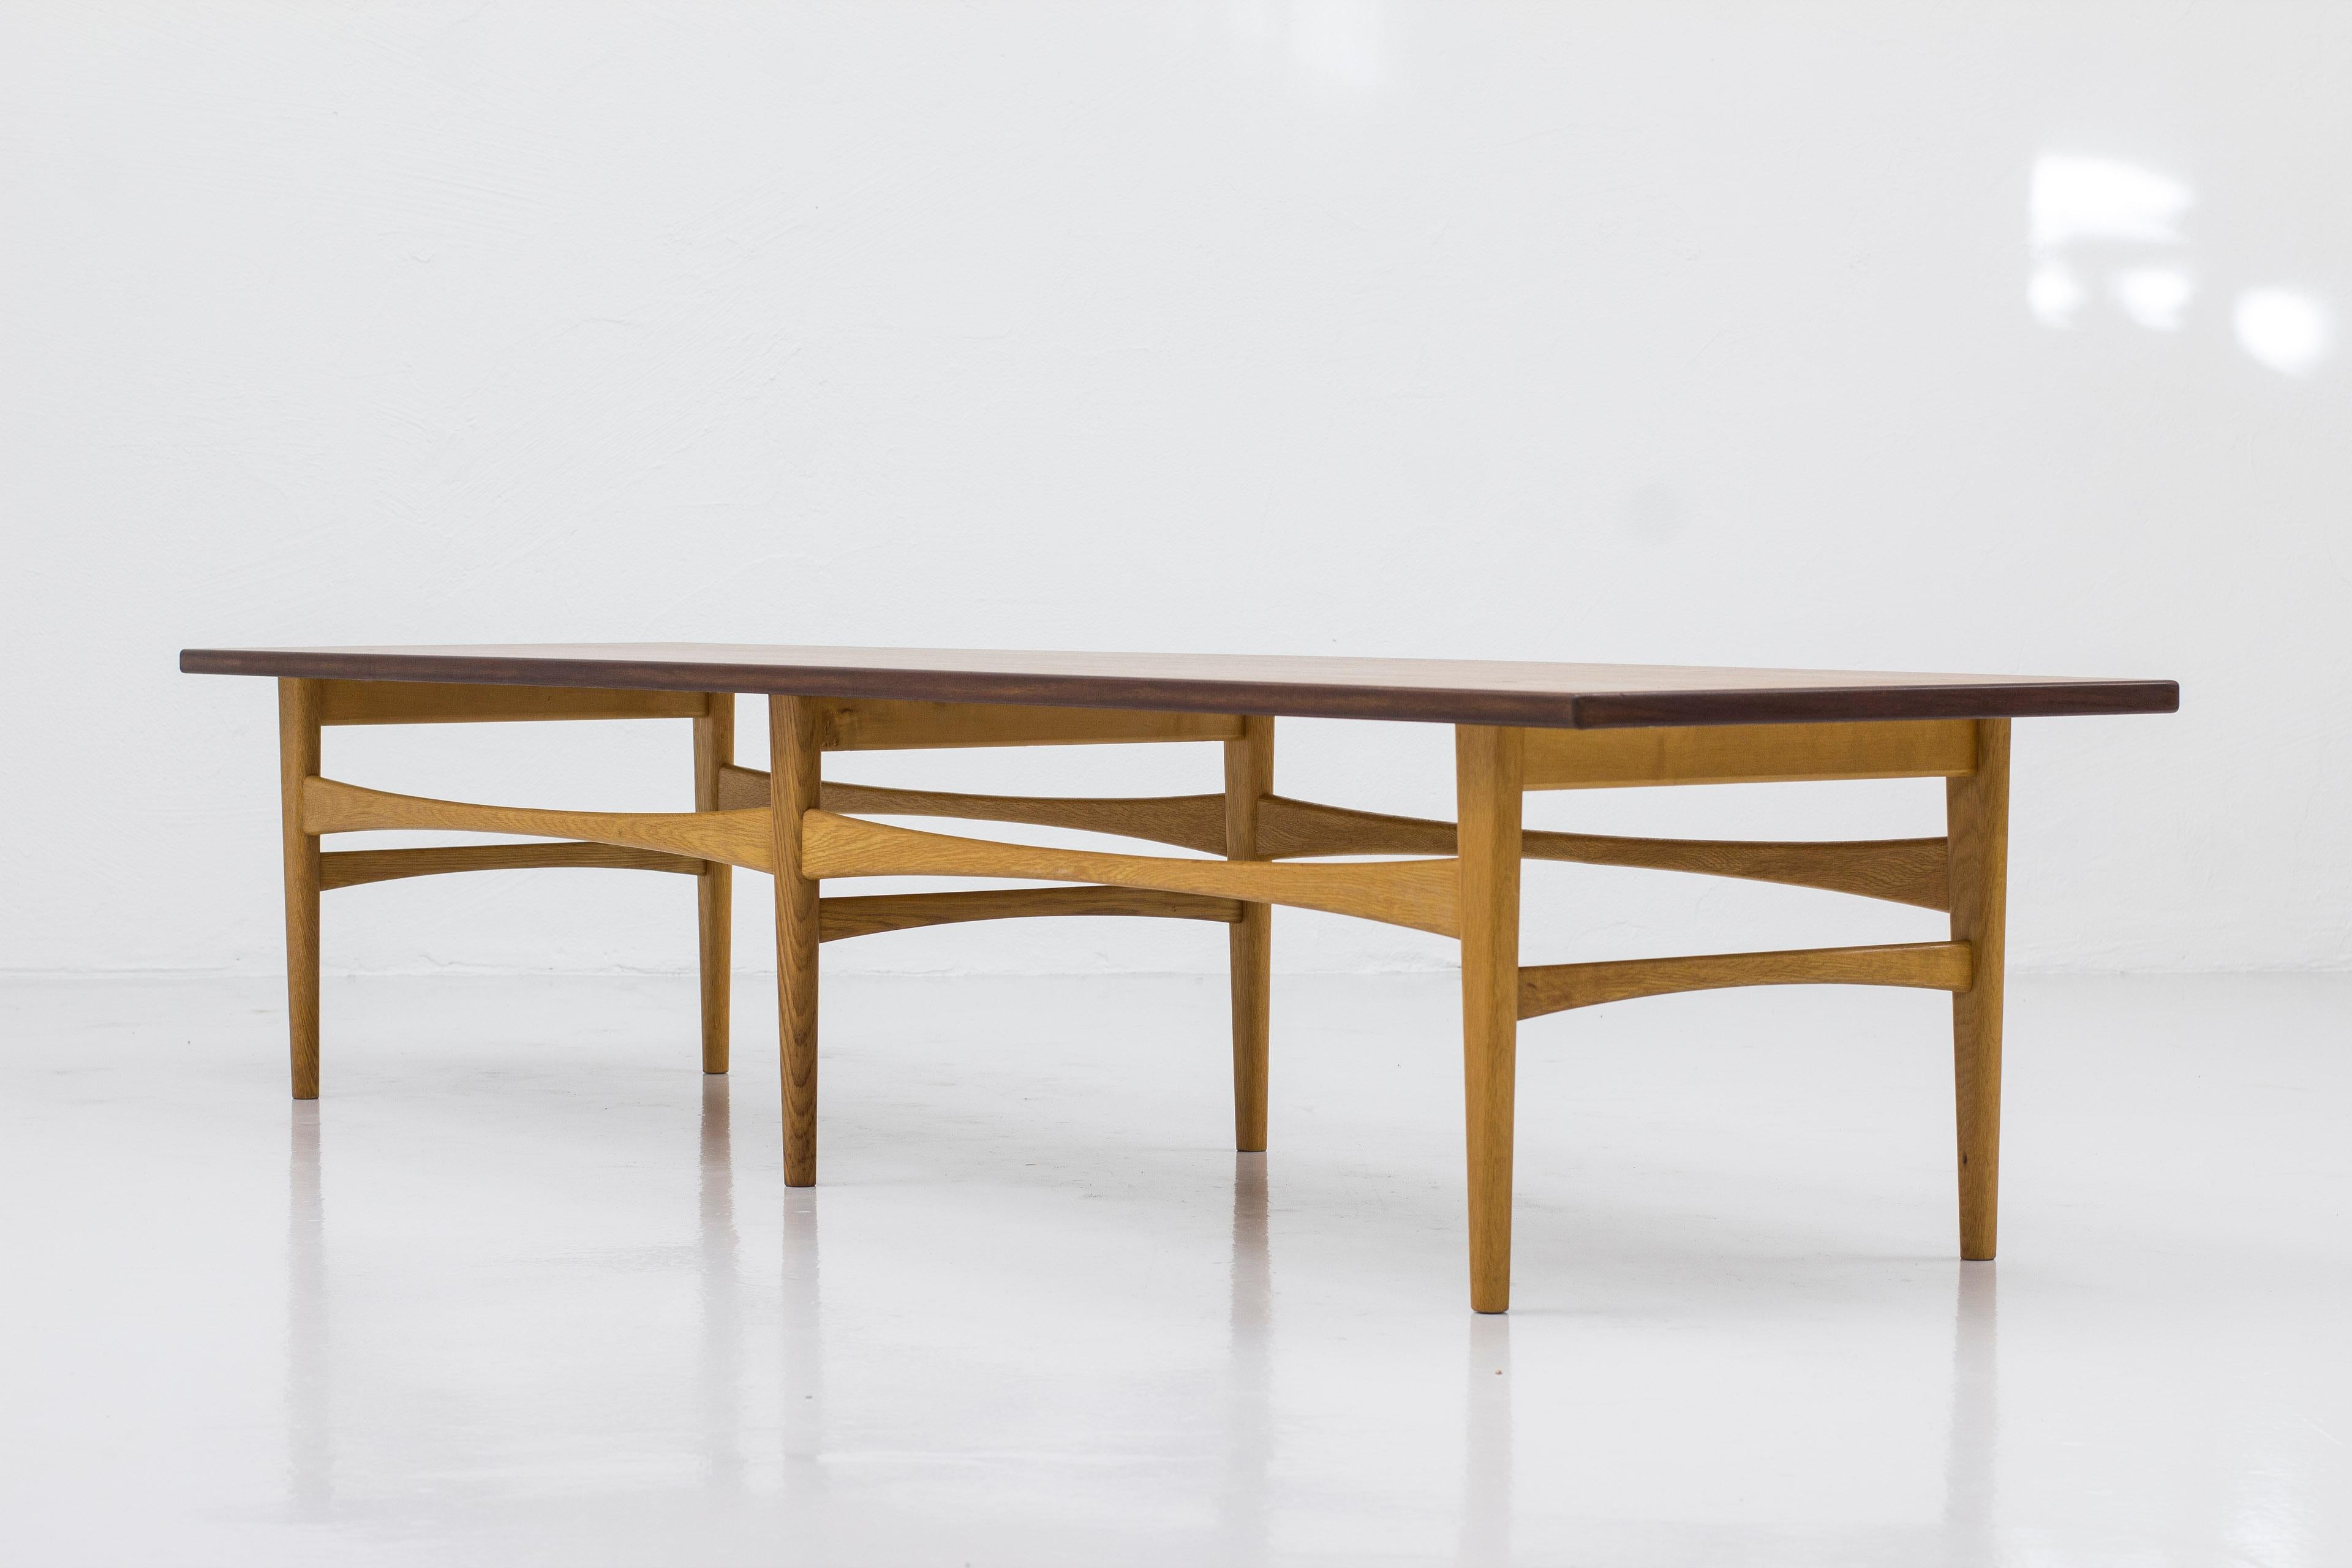 Swedish Teak and Oak Bench or Table by Eric Johansson for Abra, Sweden, 1950s For Sale